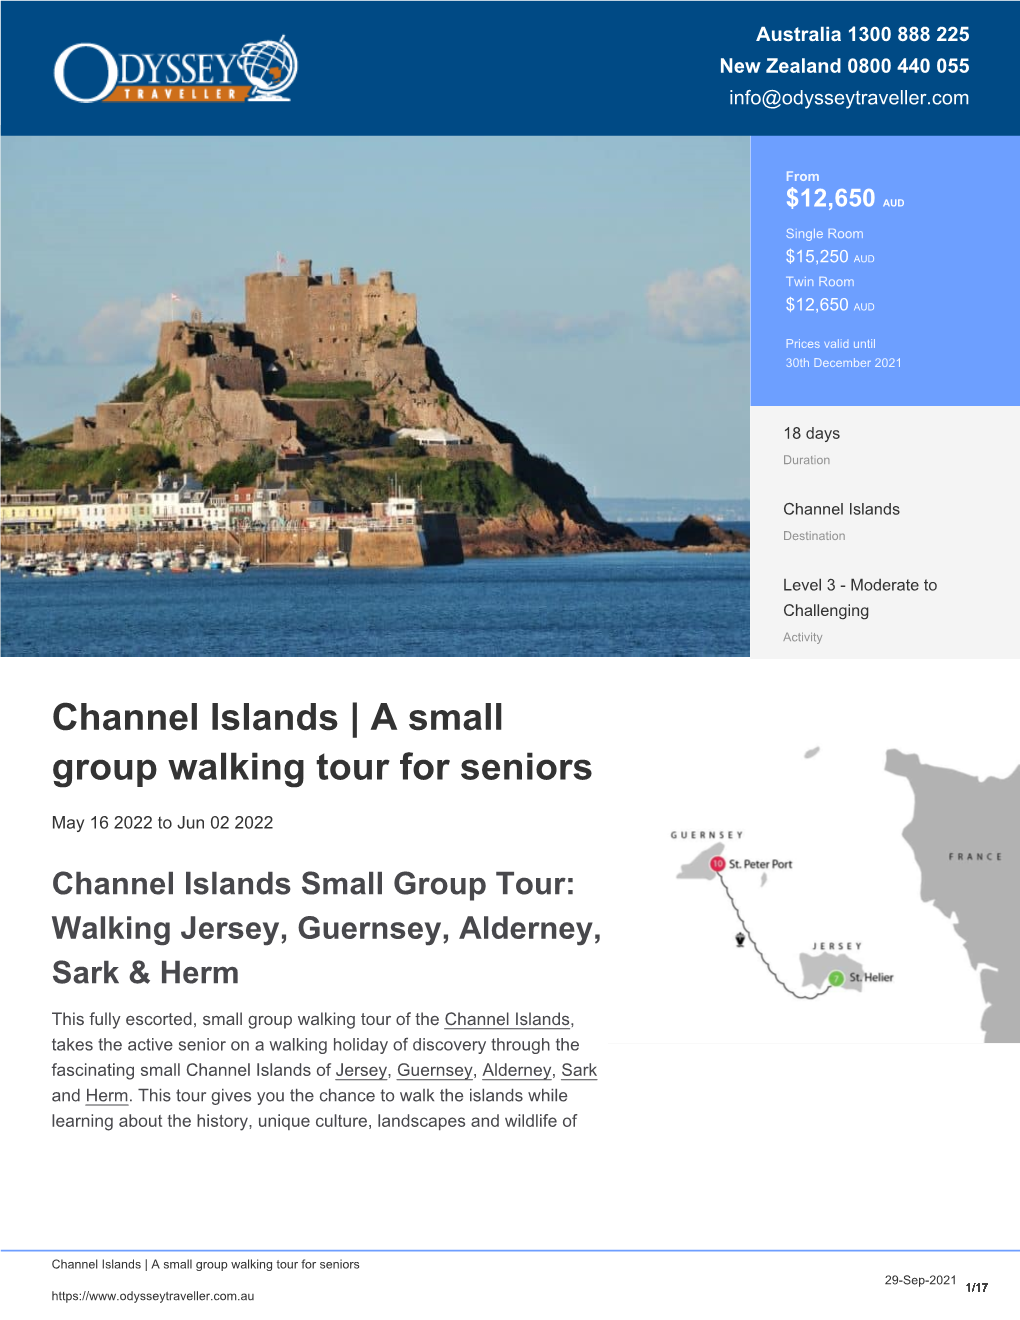 Channel Islands | Small Group Walking Tour | Odyssey Traveller